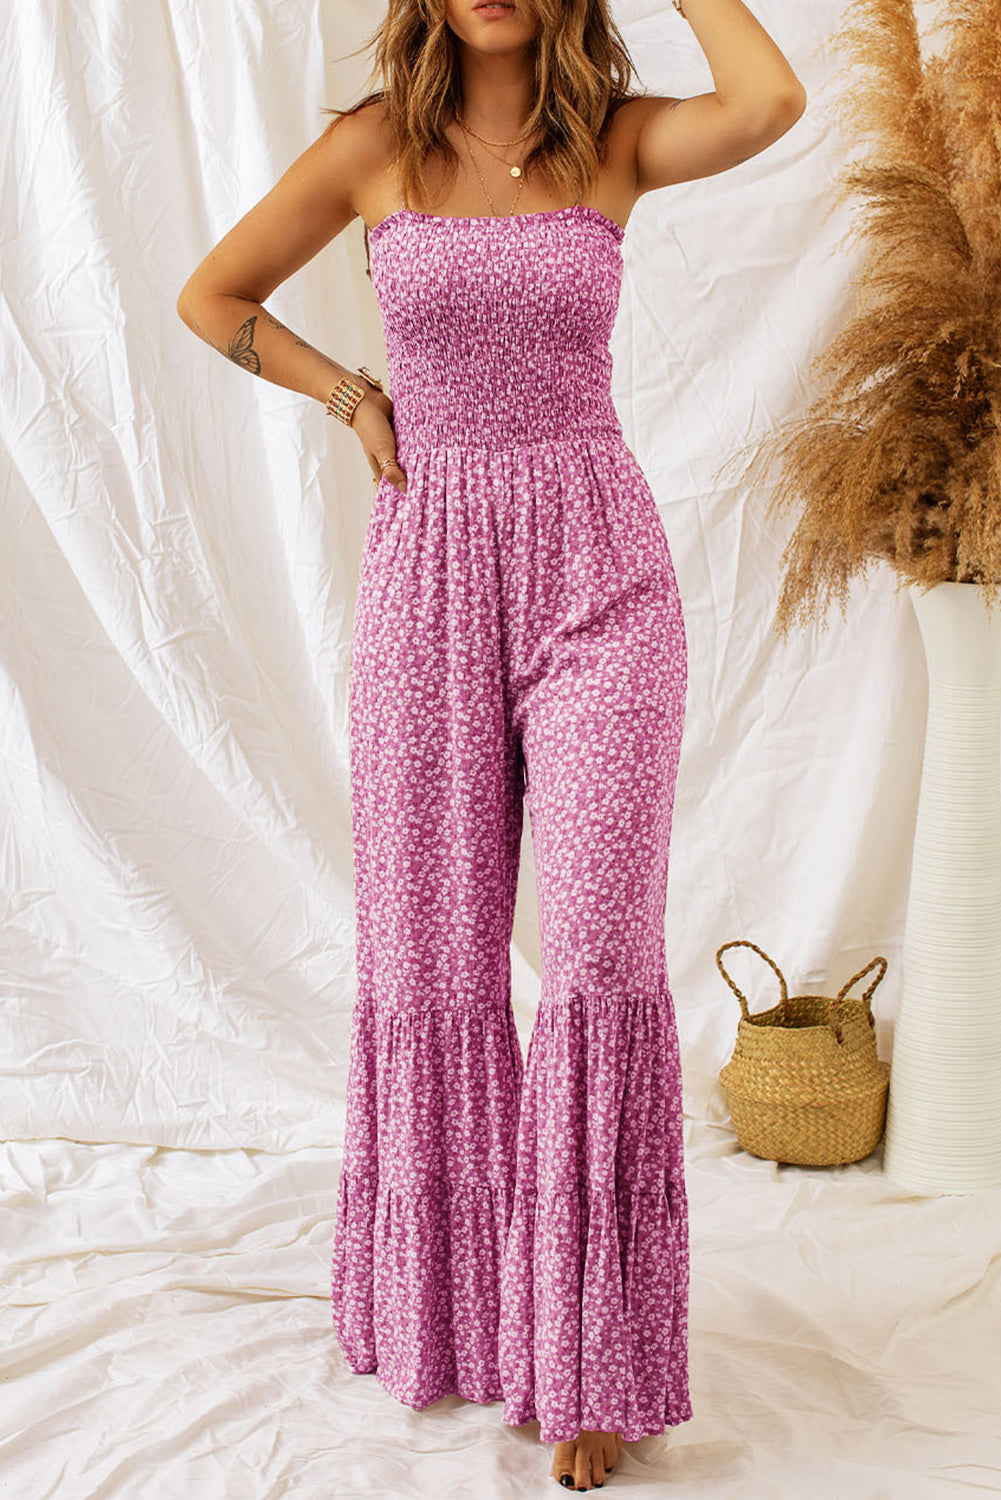 Flower Lover Jumpsuit - Cheeky Chic Boutique